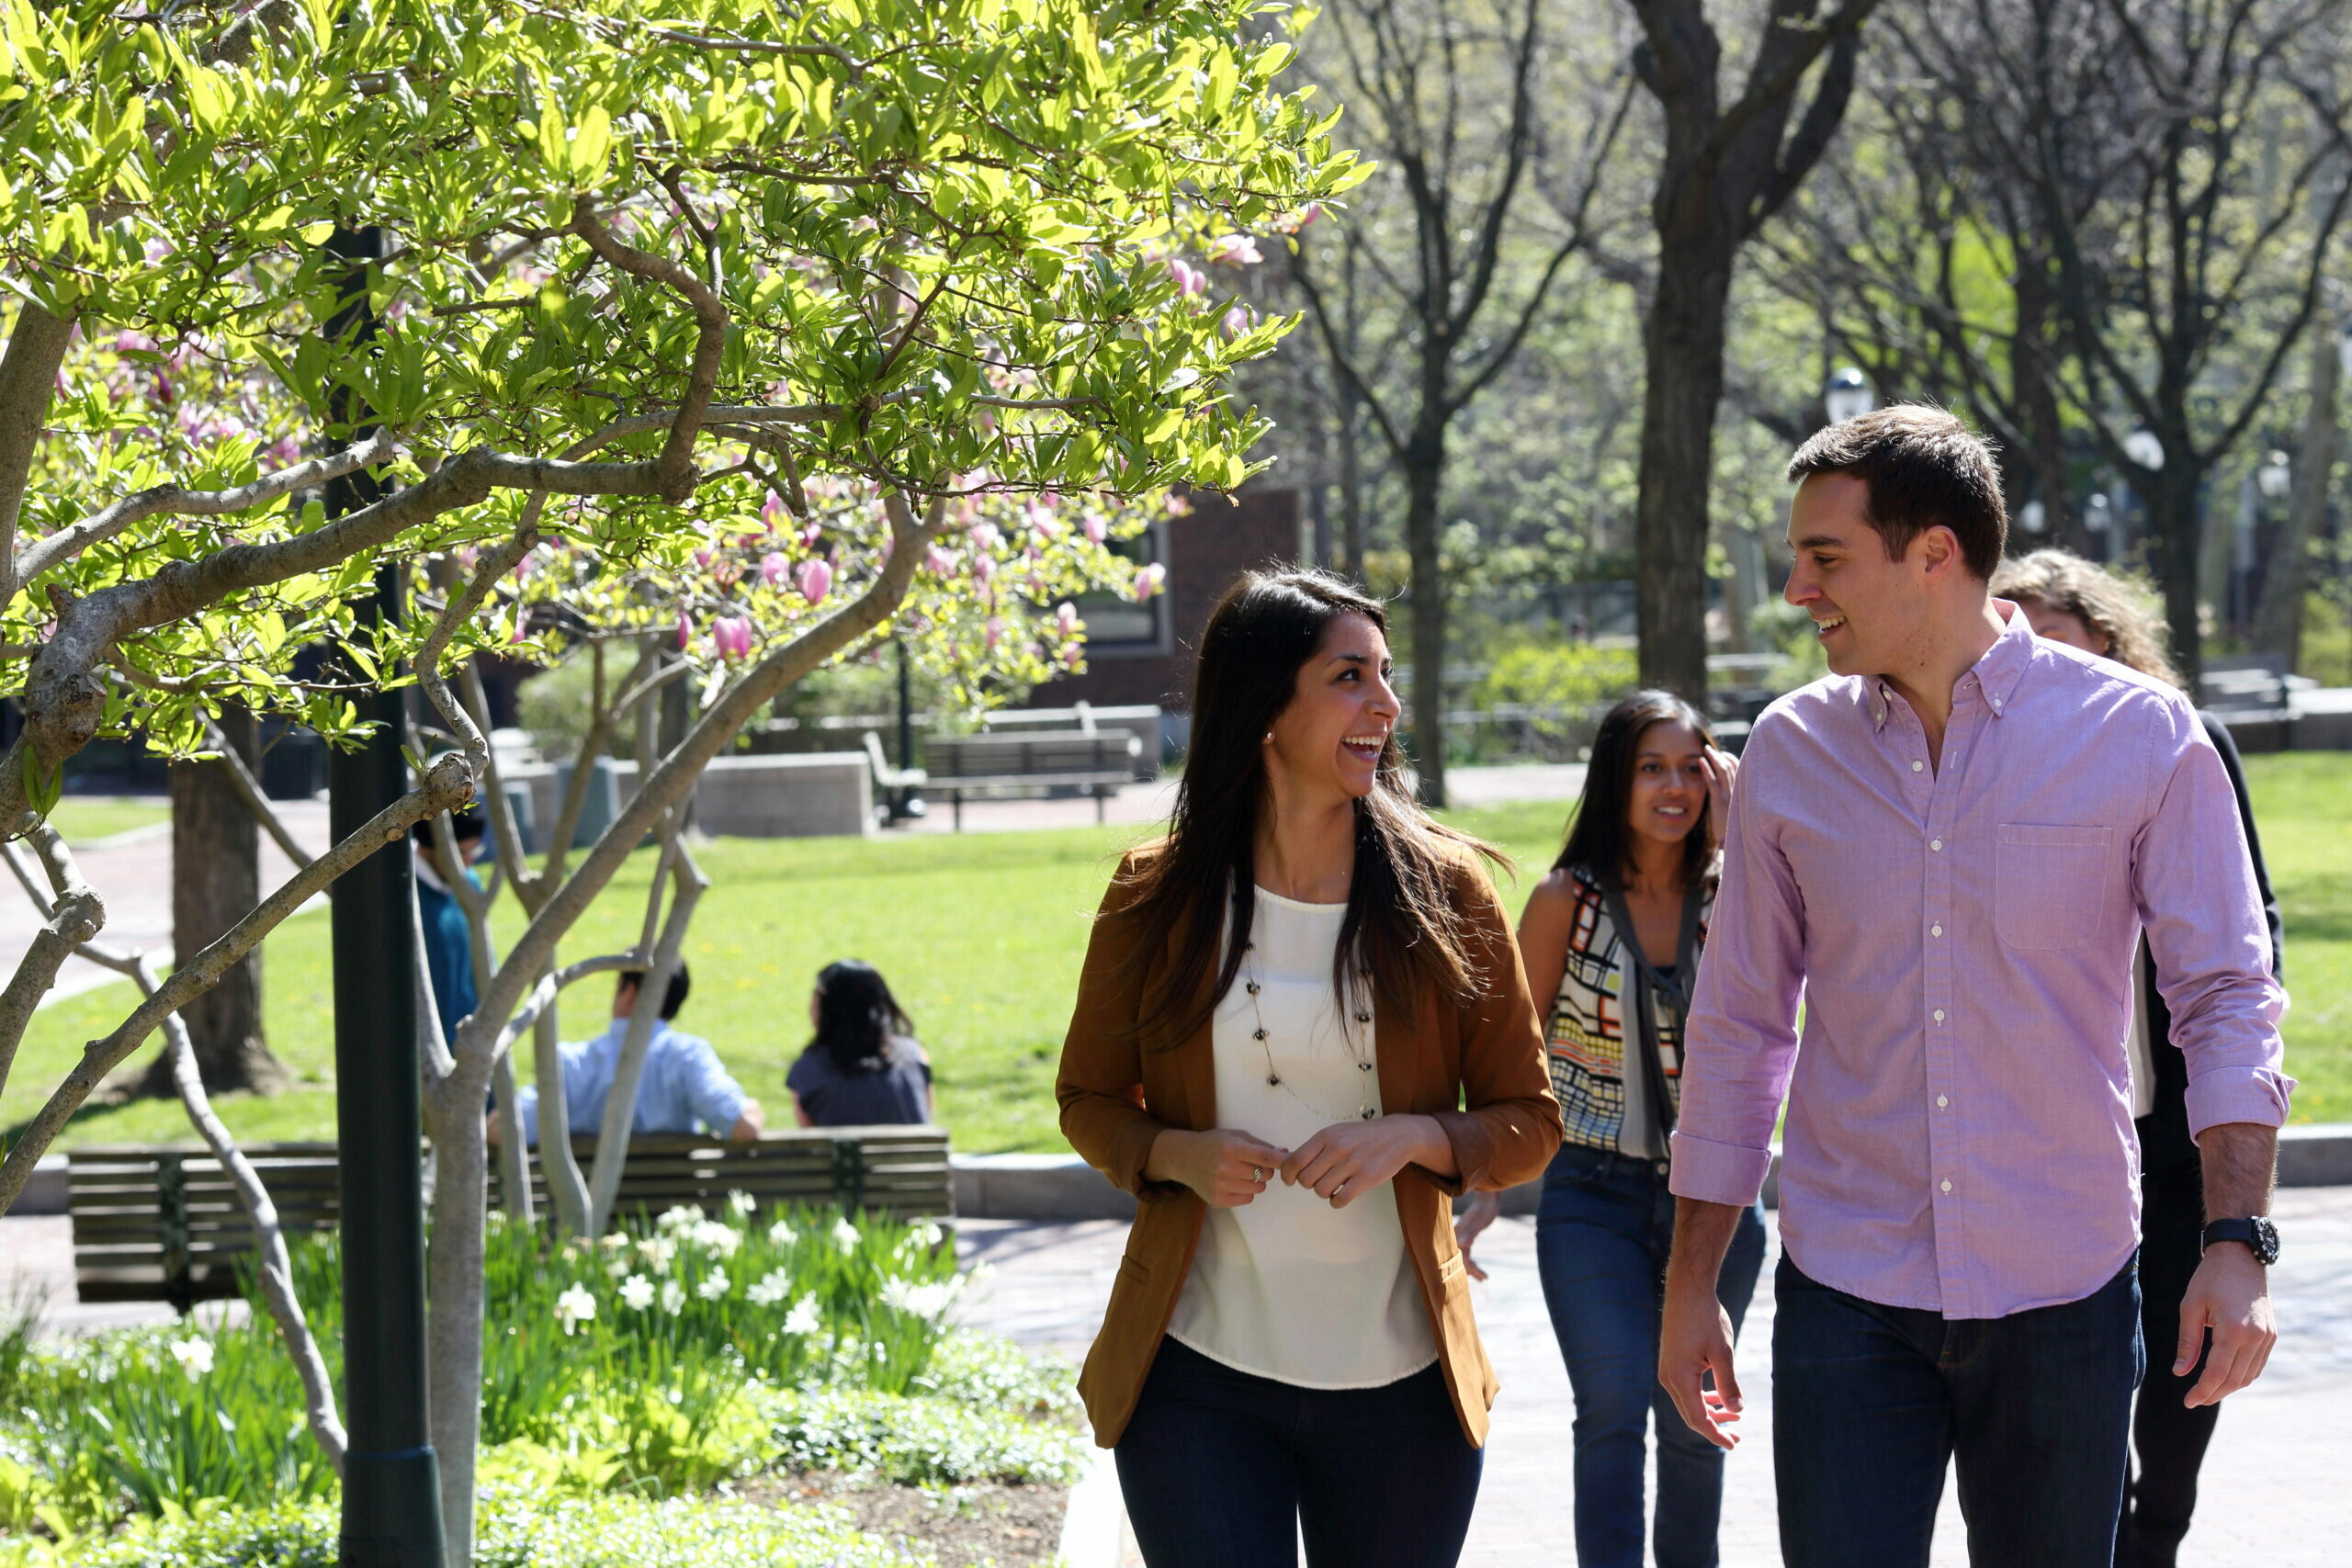 Students smiling and talking as they walk outside on Penn's campus during the spring time